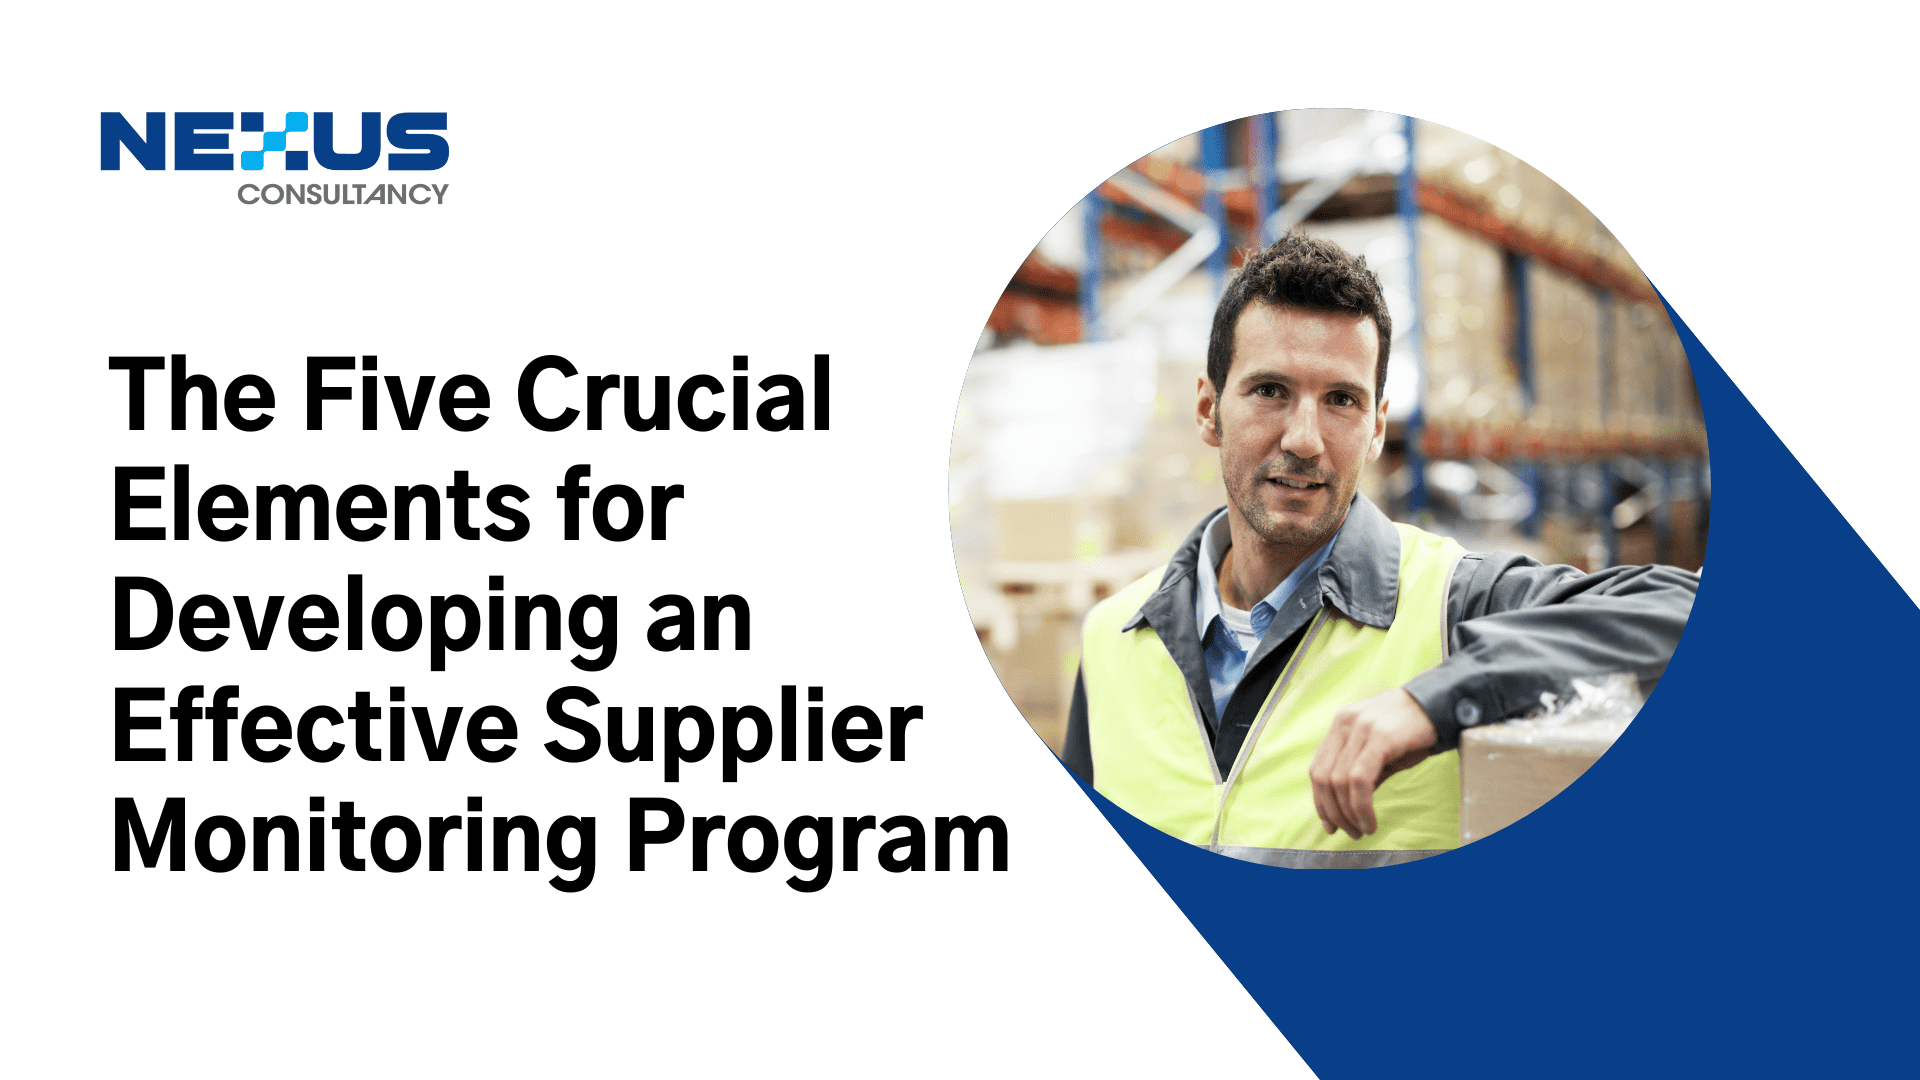 The Five Crucial Elements for Developing an Effective Supplier Monitoring Program